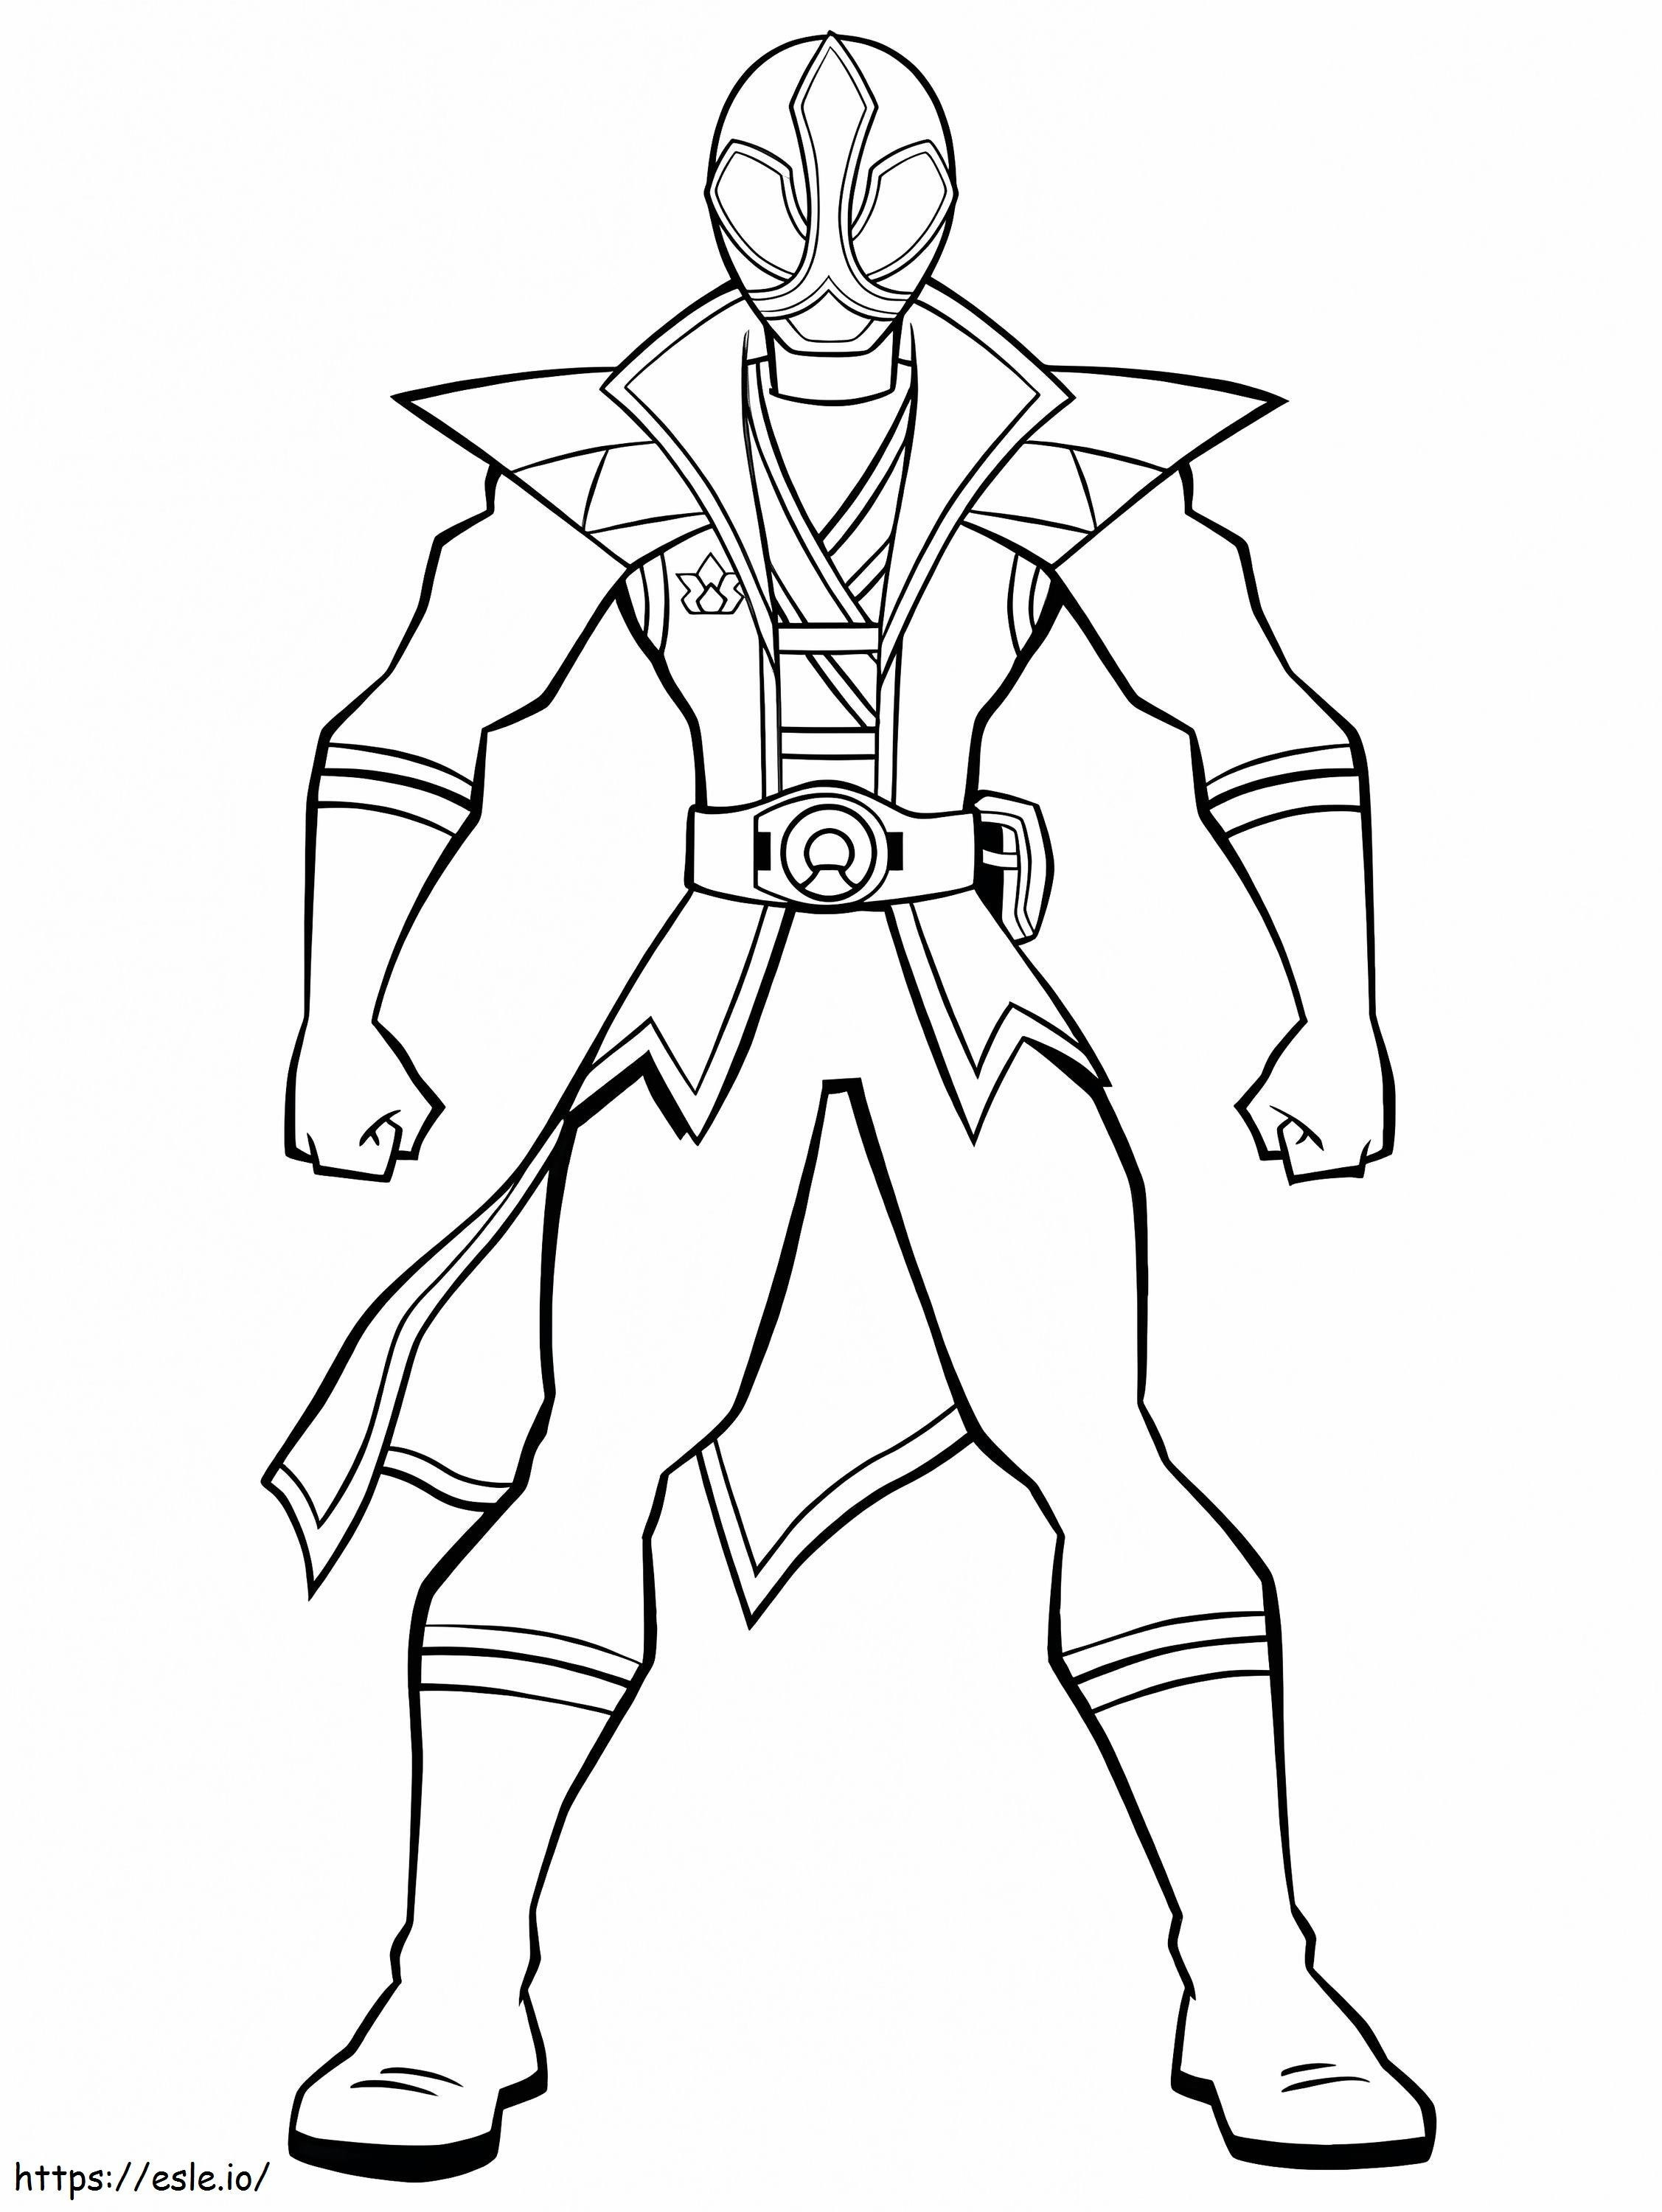 Power Rangers 16 coloring page